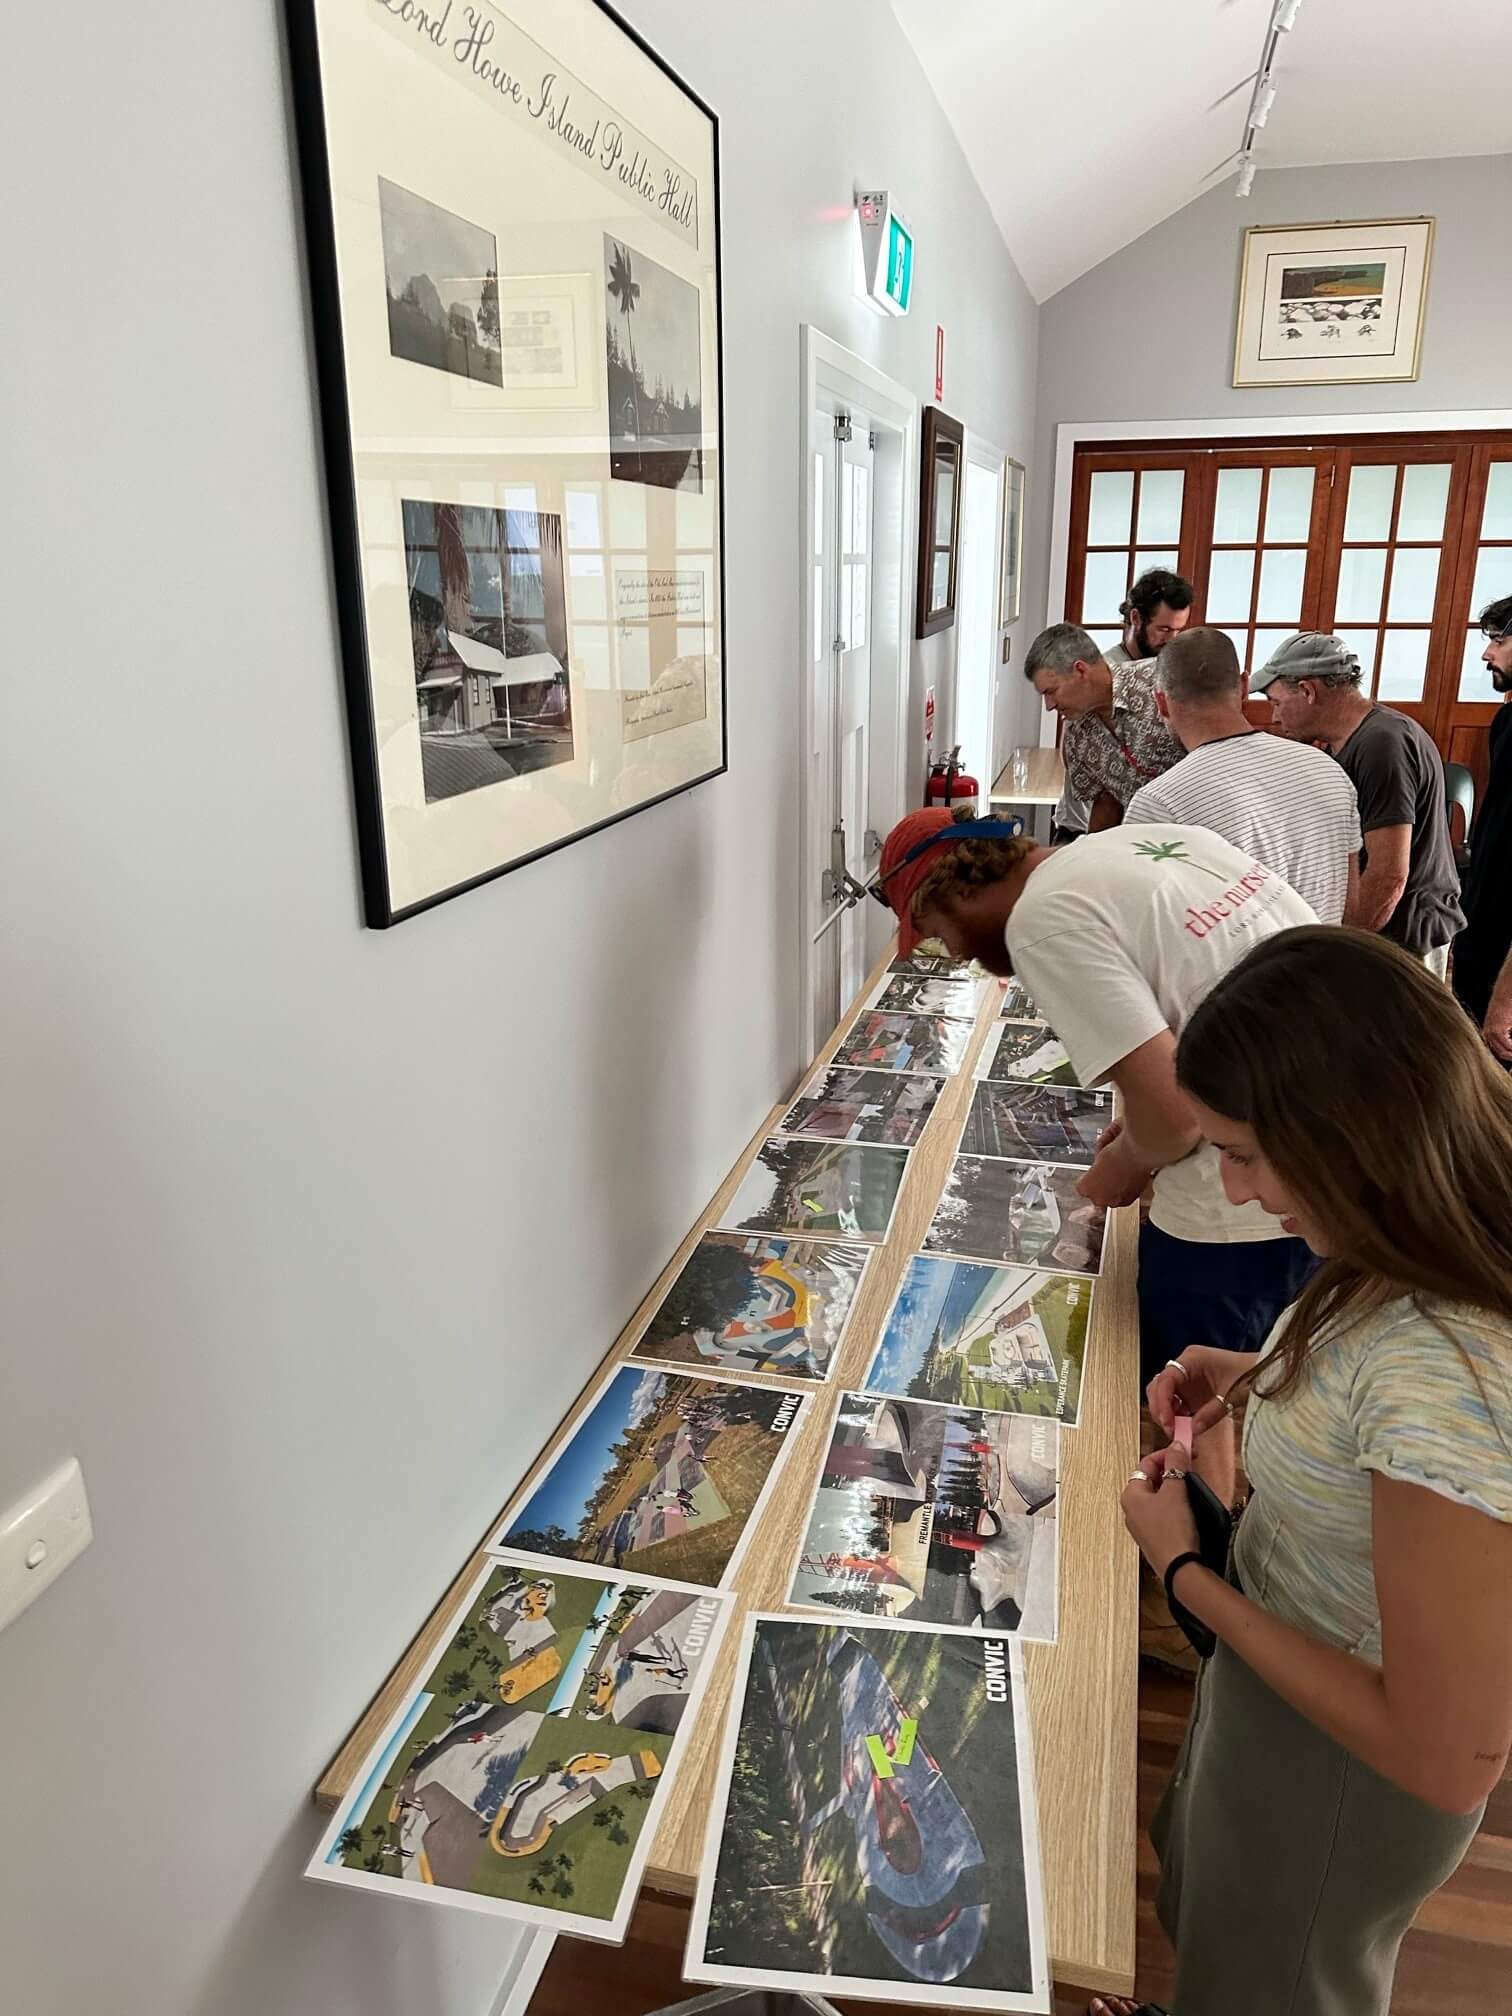 People looking at different photos on a desk depicting design concepts for a skatepark